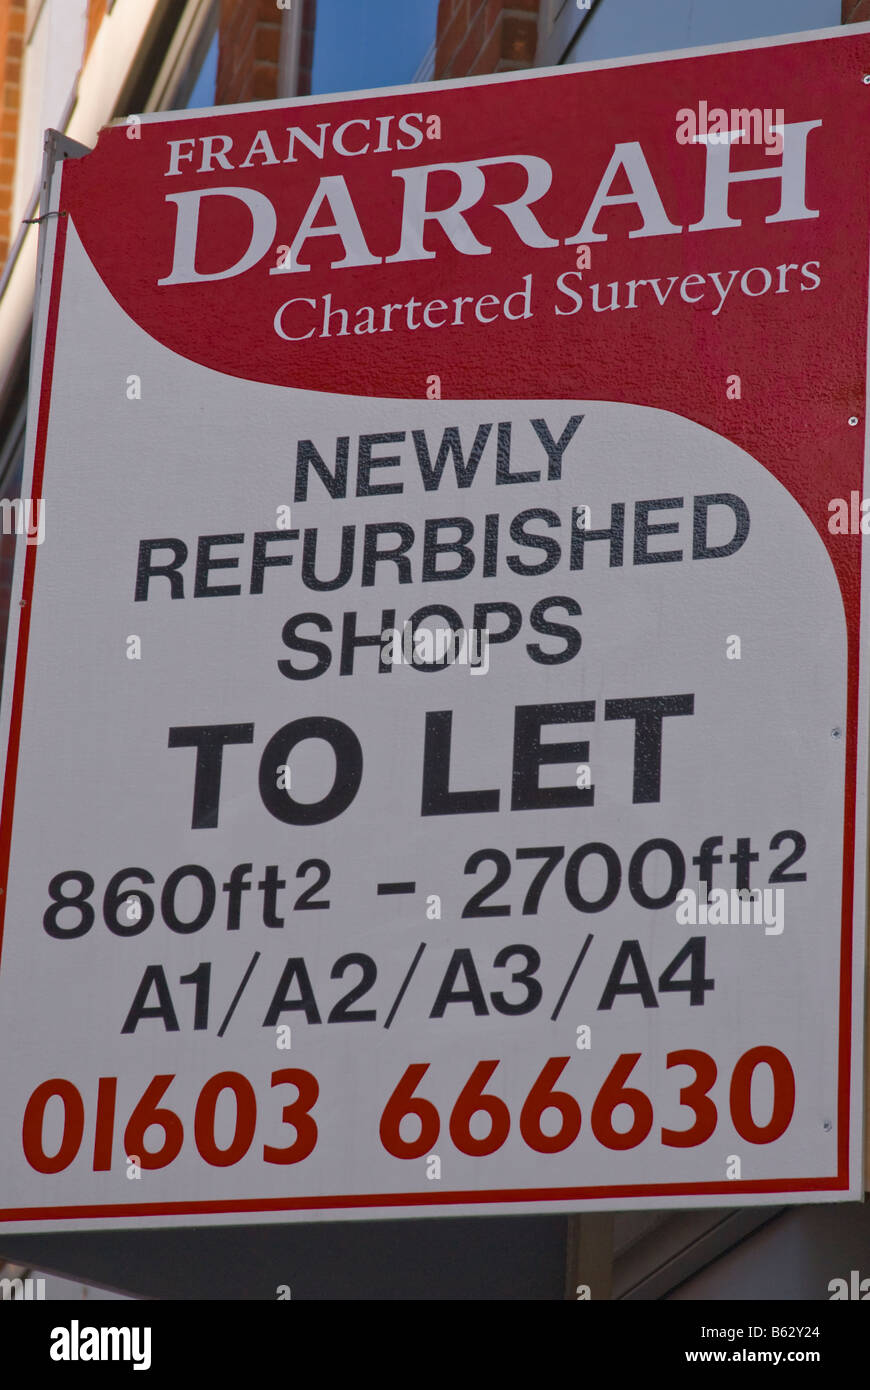 Shops to let sign in the Uk Stock Photo